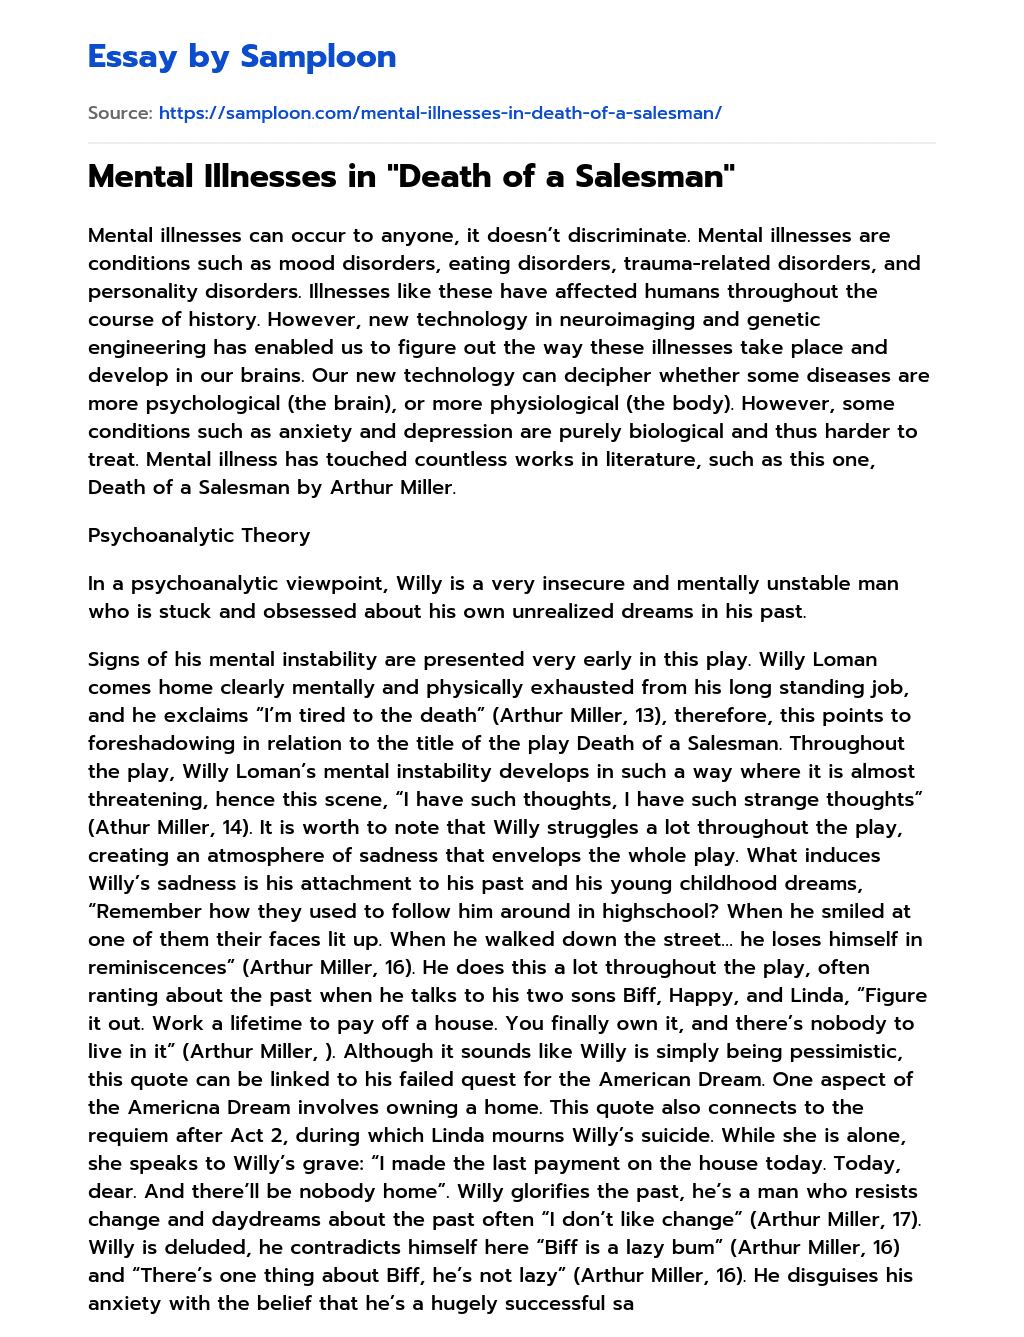 Mental Illnesses in “Death of a Salesman” Analytical Essay essay